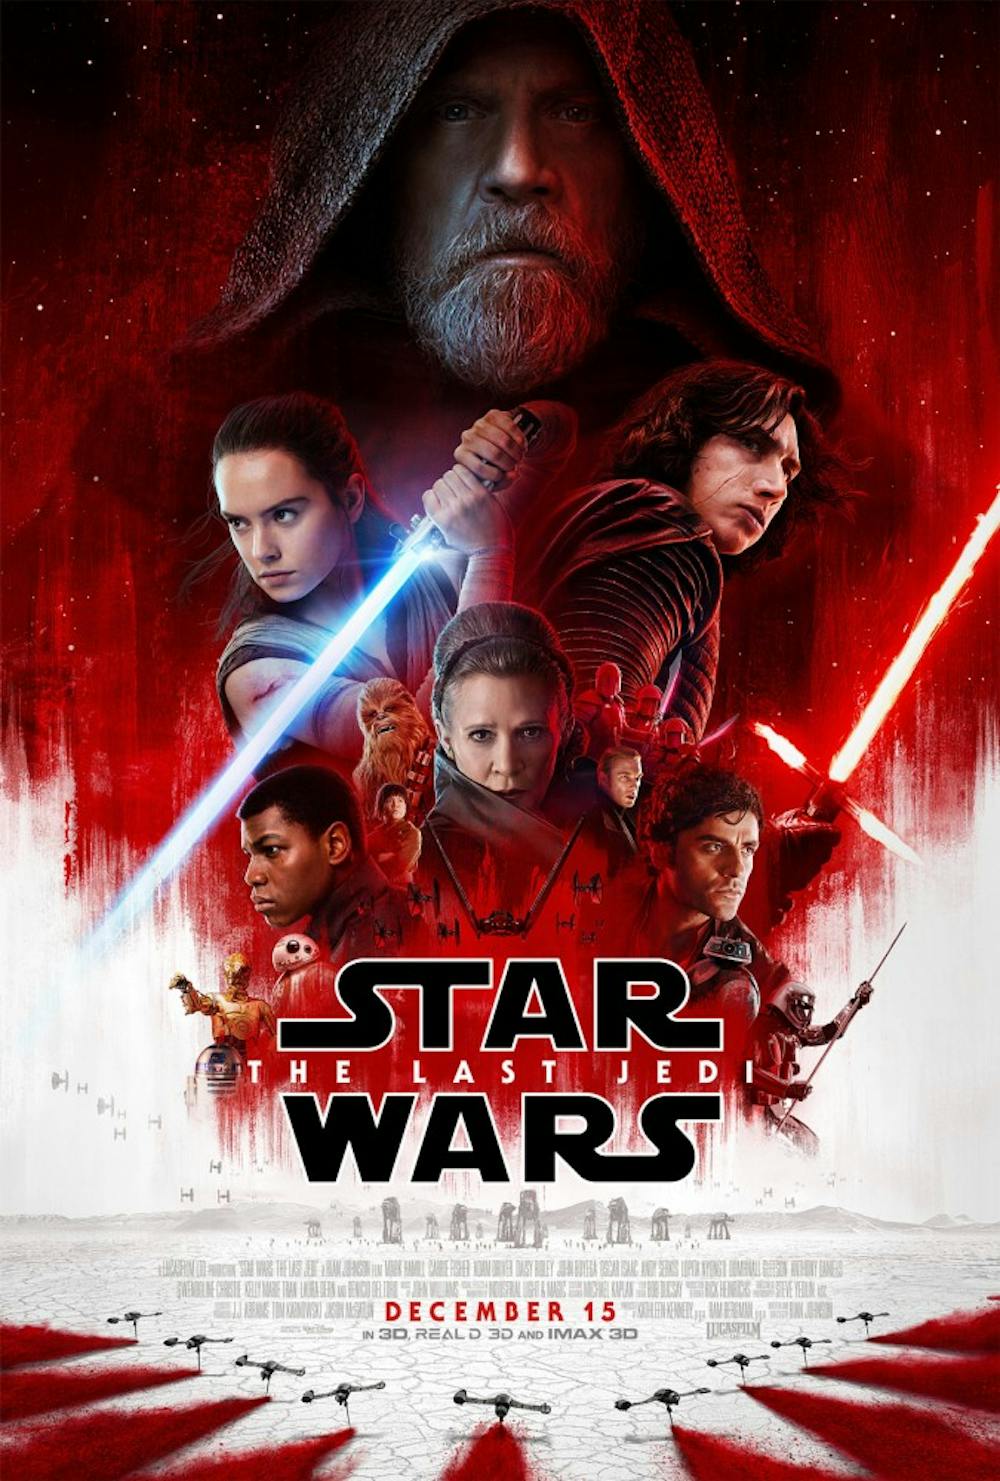 <p>“Star Wars: The Last Jedi” will be the biggest film of the year, despite losing Carrie Fisher before the release. December also brings us a few gems along with Spielberg’s latest dad-fare.</p>